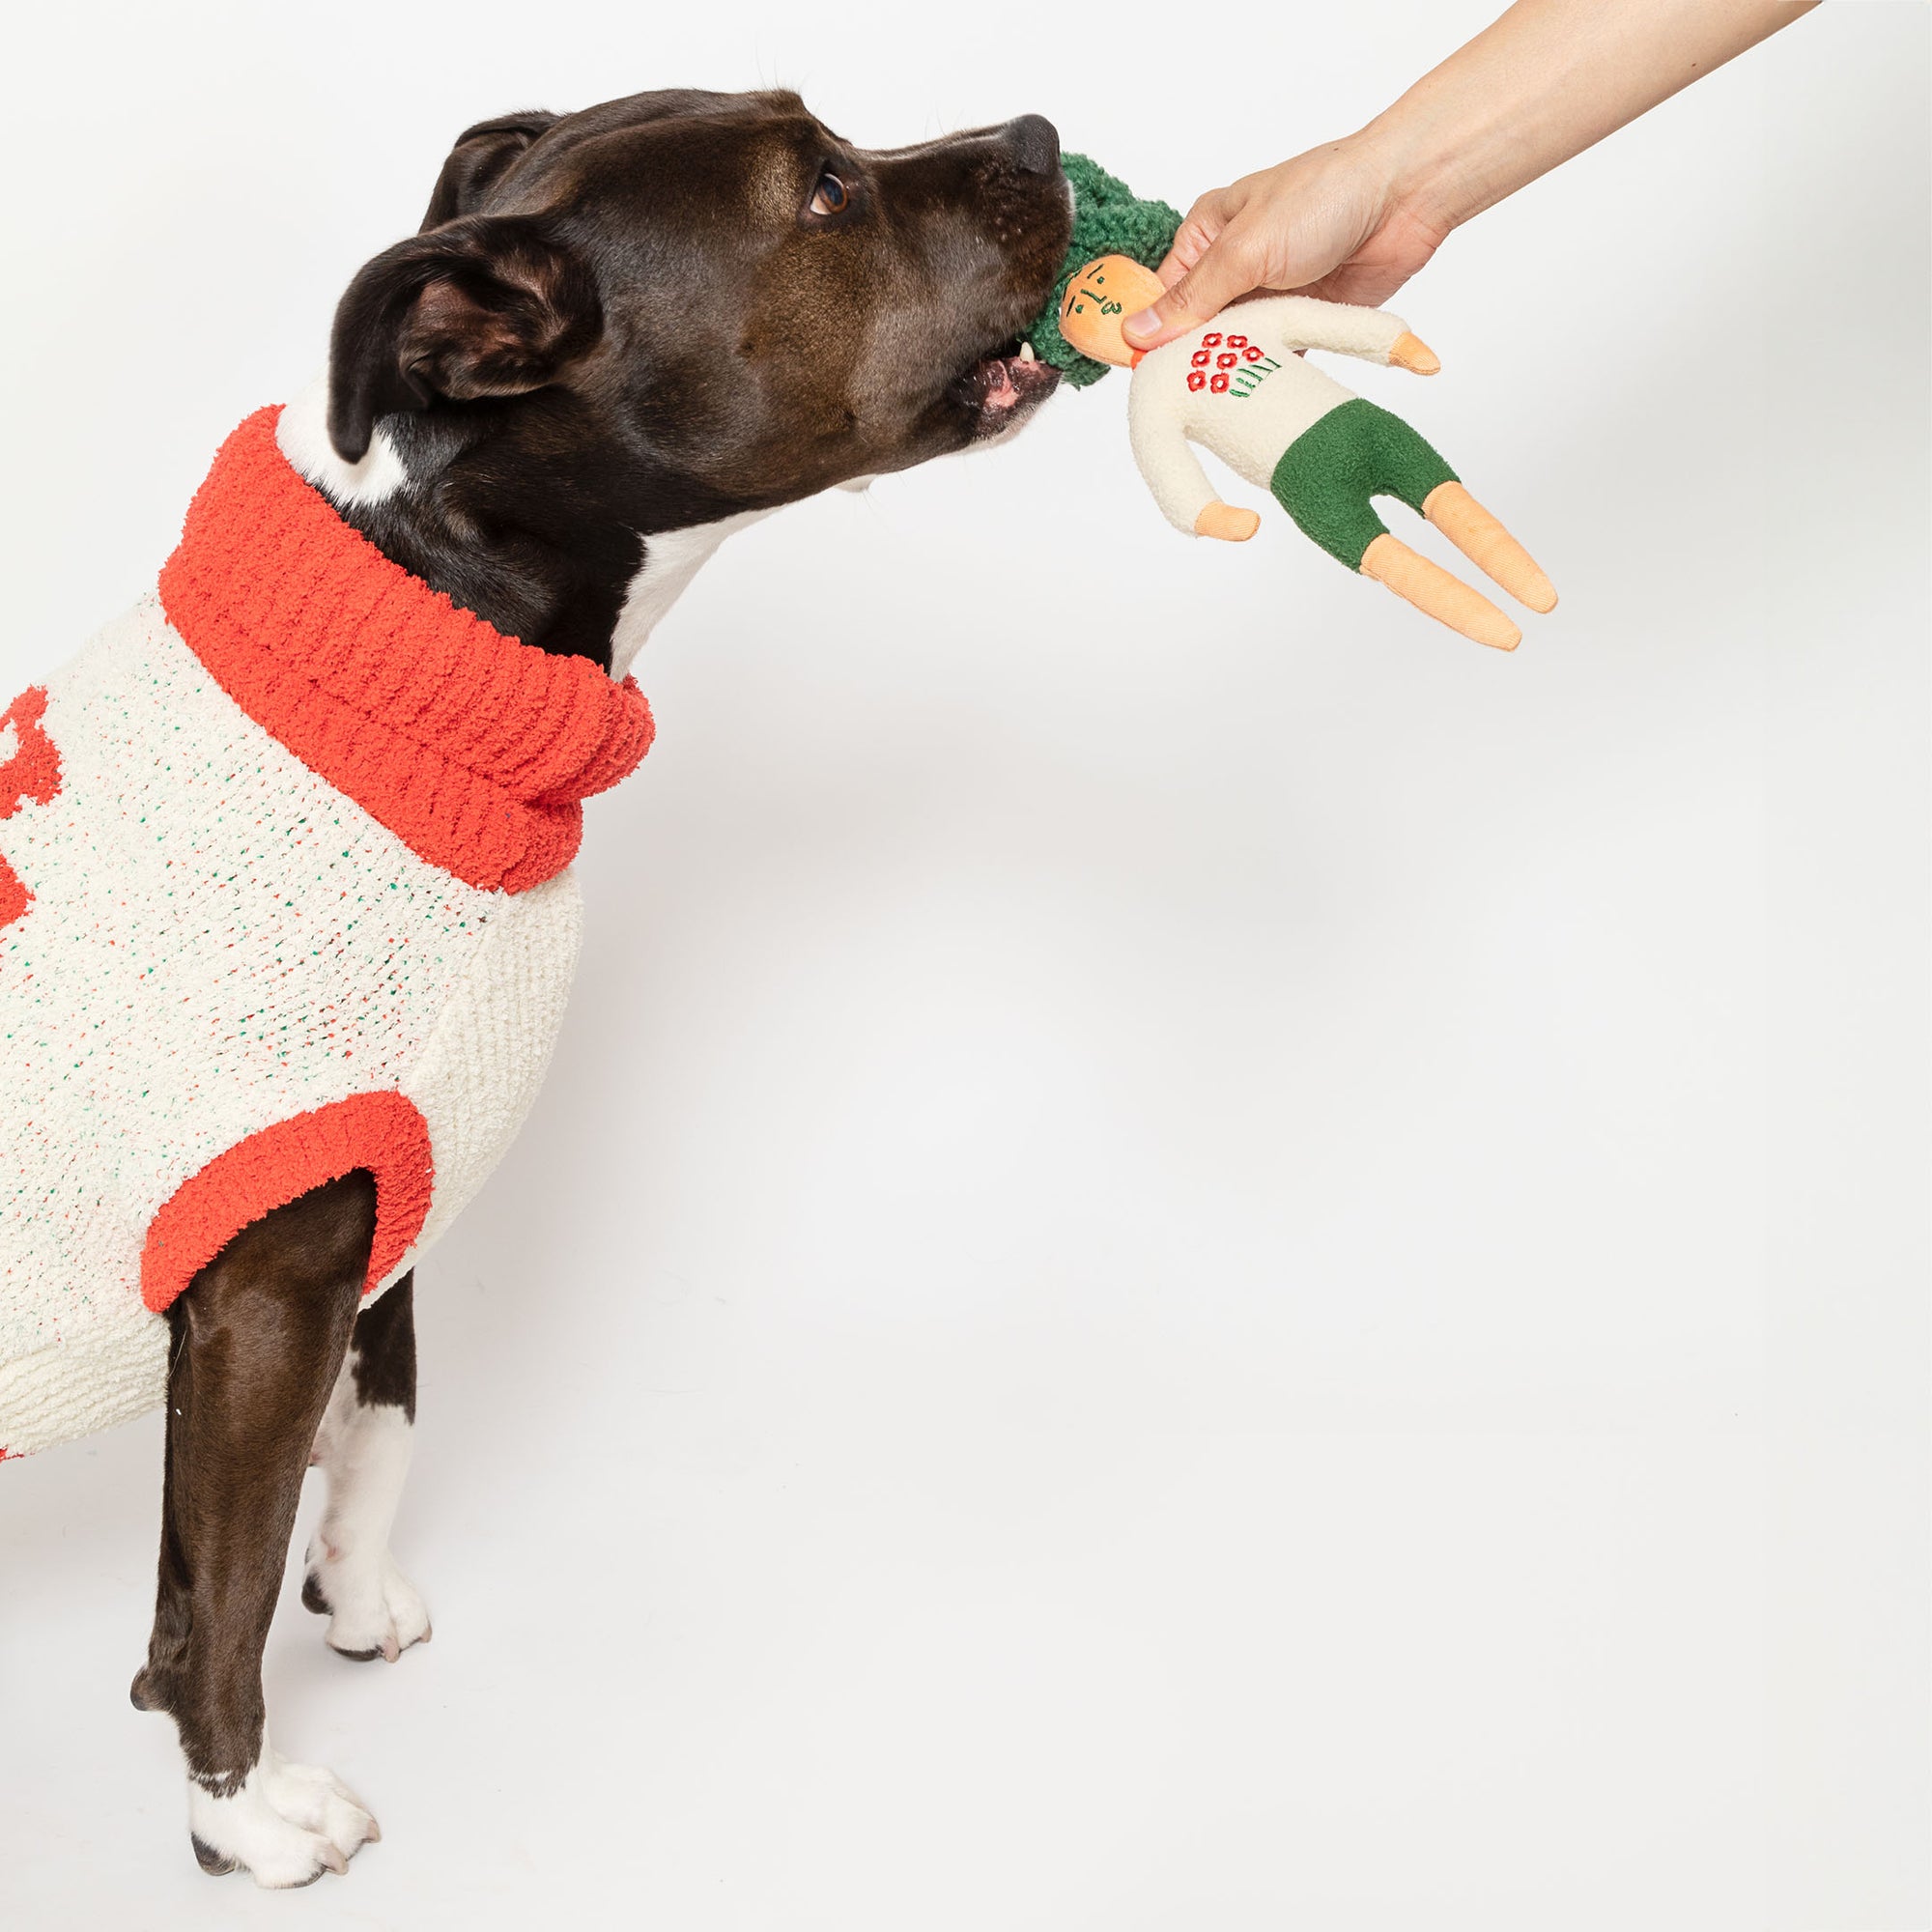 The image features a brown dog with white markings, wearing a cozy, red and white sweater, engaging with a green-haired, nosework dog toy held by a human hand. The dog appears interested in the toy, showcasing how such items are used in play and scent detection activities, stimulating the dog’s senses and encouraging interactive play. The white background emphasizes the interaction and the contrasting colors of the dog’s sweater, the toy, and the dog's coat.